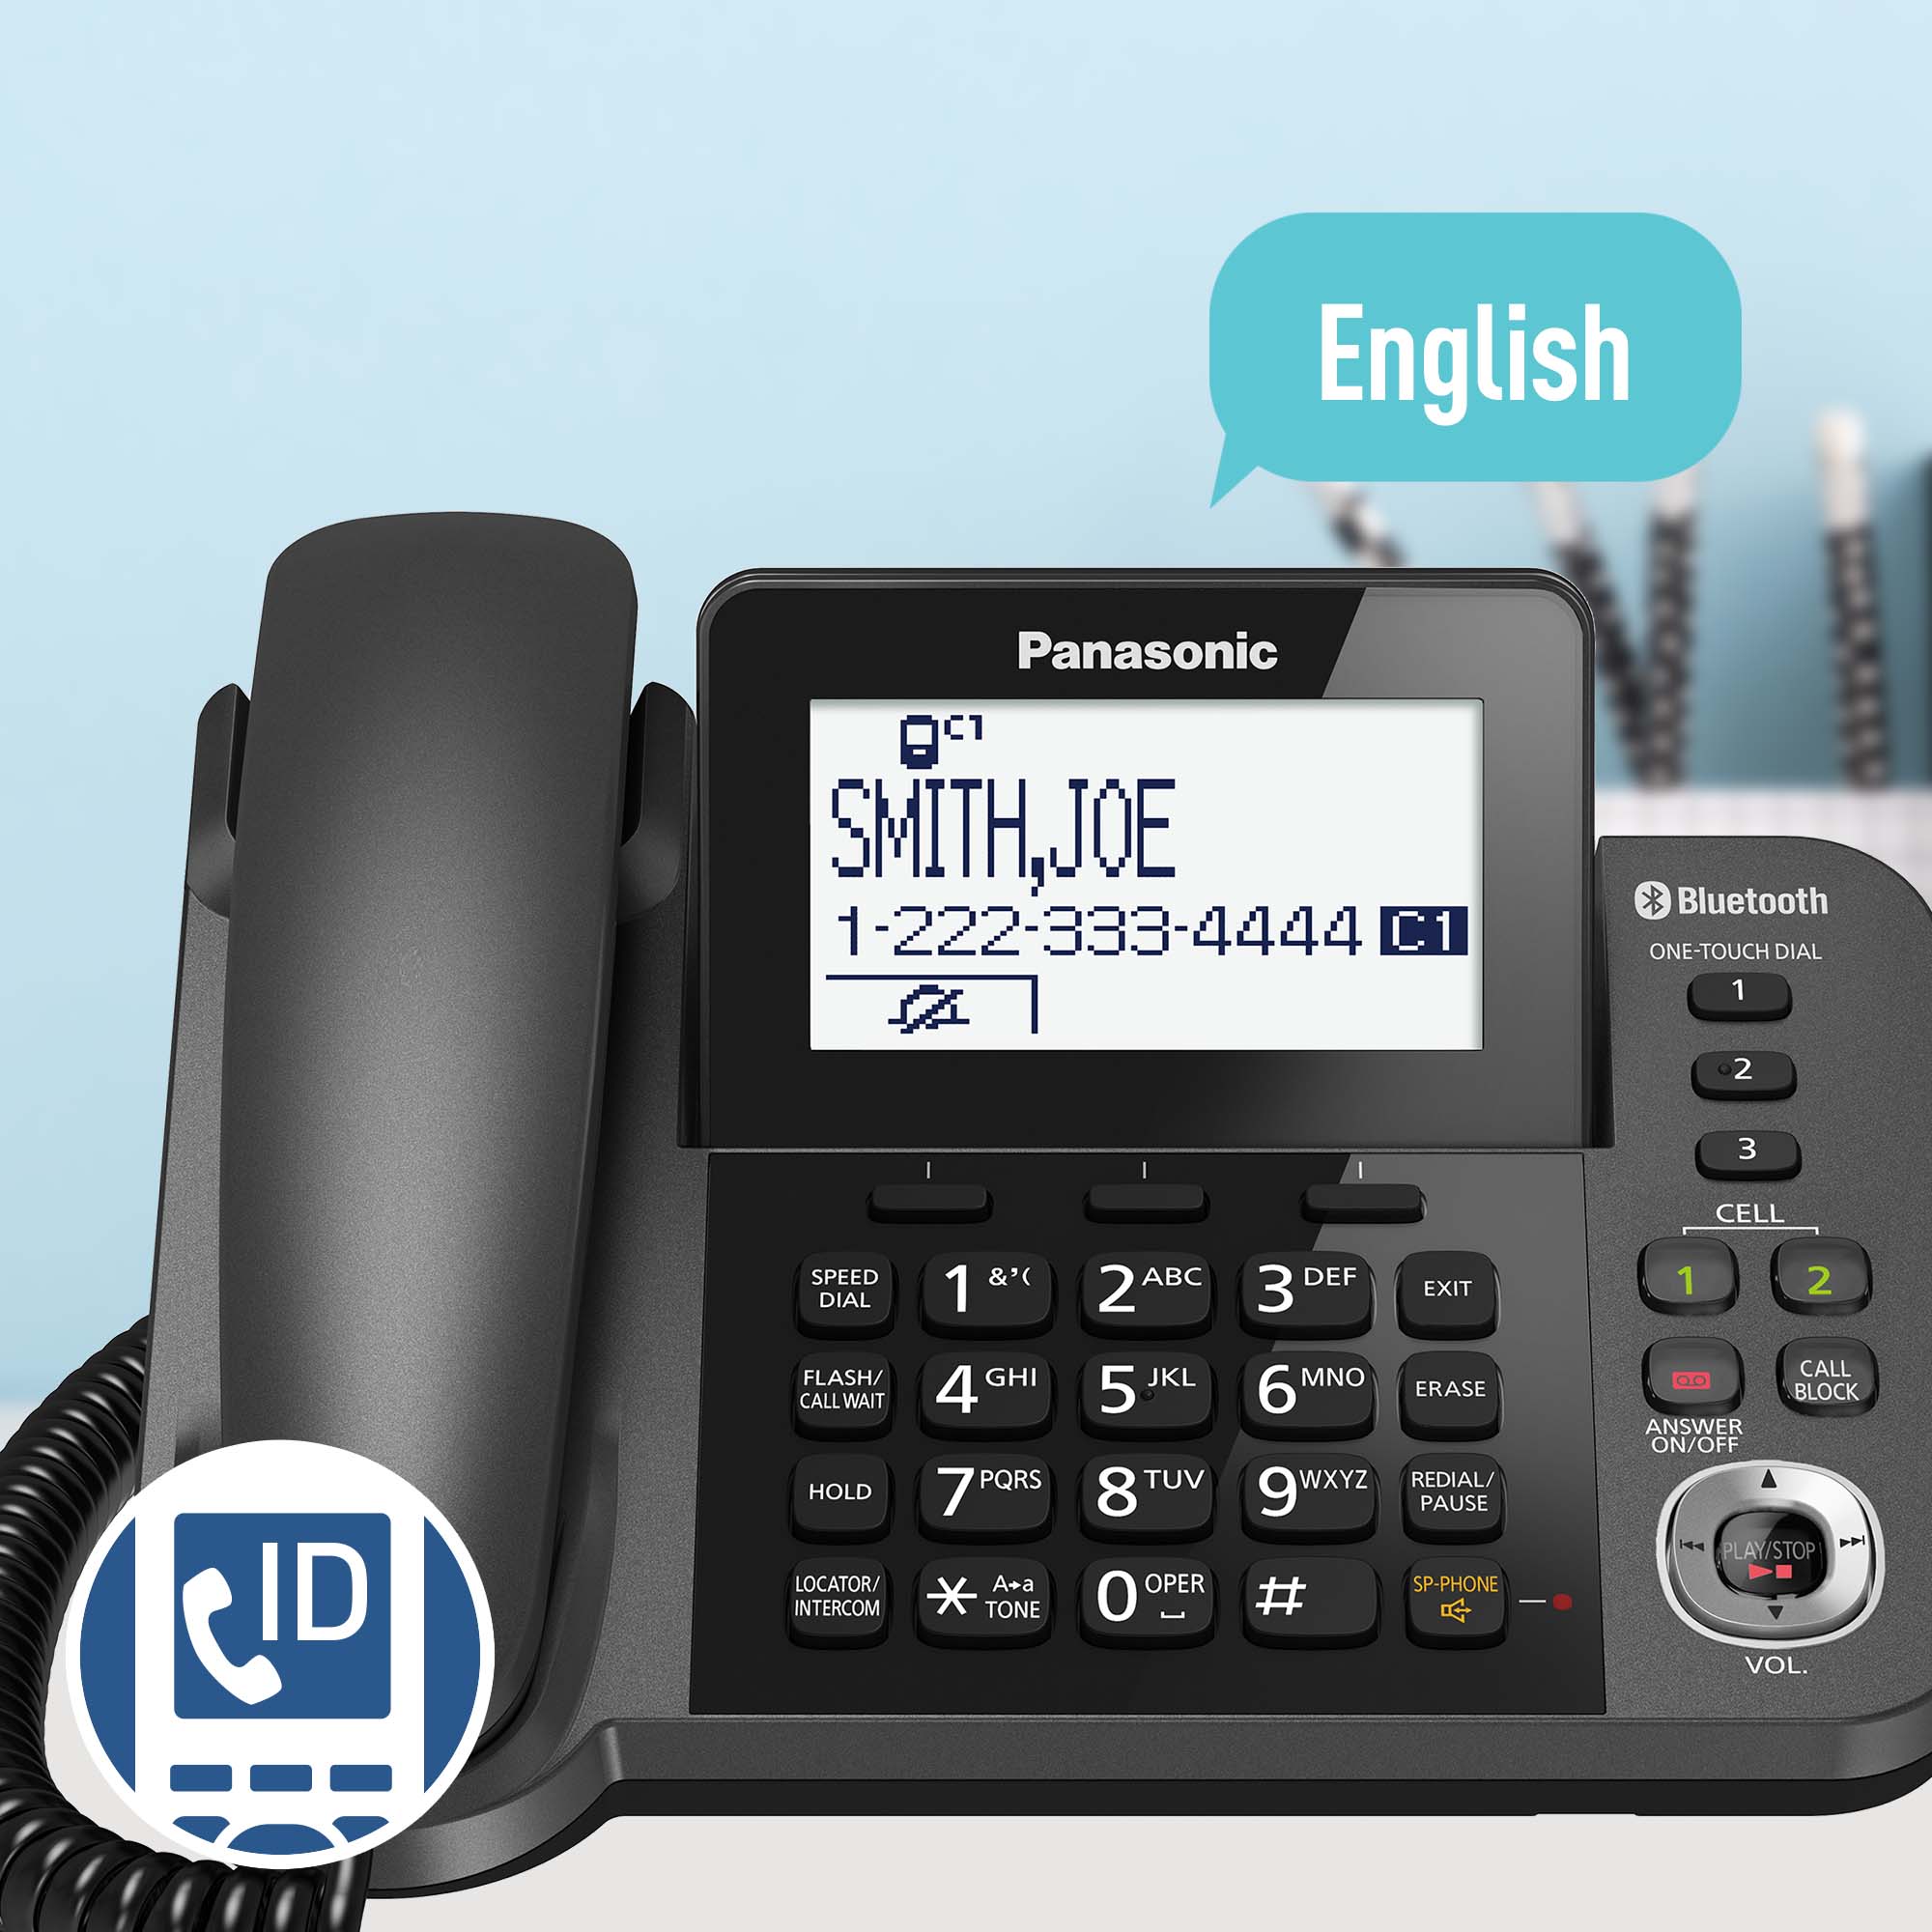 Panasonic Link2Cell Corded Phone - Machine System Digital Corded Handsets, KX-TGF382M Answering 2 with